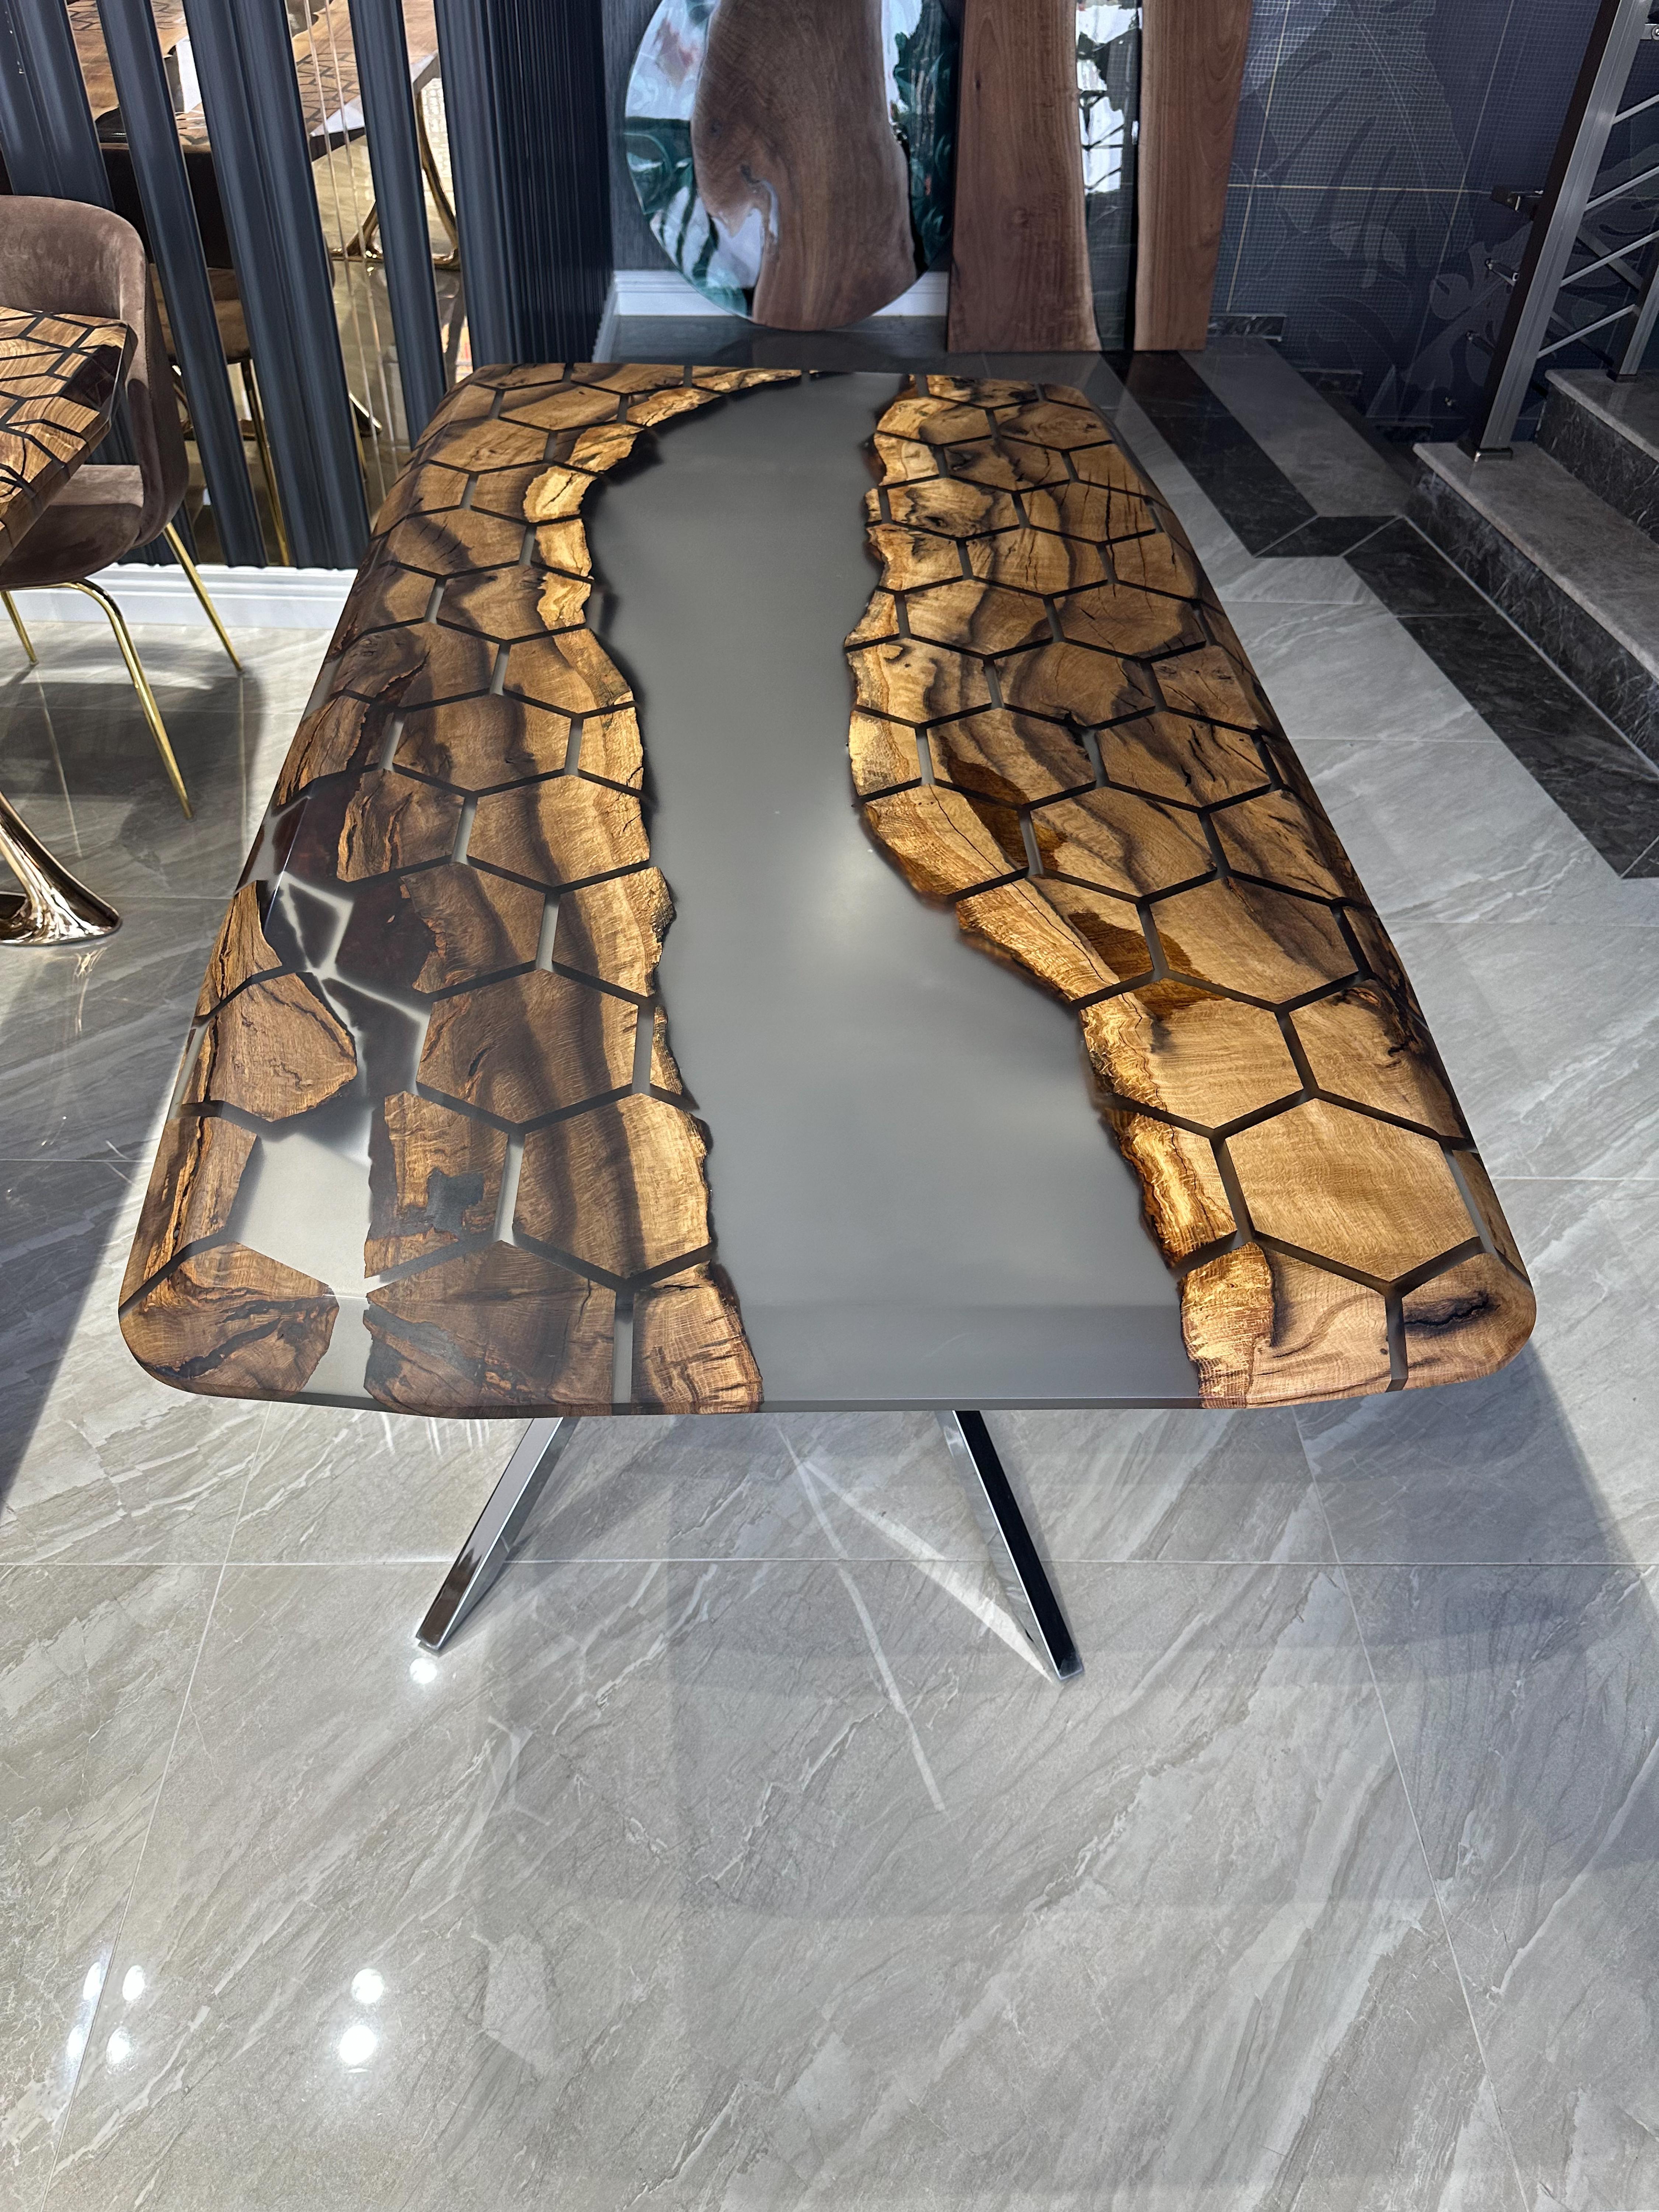 HEXAGON GRAY EPOXY RESIN DINING TABLE 

This epoxy table emerges as a unique work of art, inspired by nature's beauty. With its honeycomb pattern and hexagonal shapes, it offers an aesthetic delight. 

Our narrative embodies the magnificent order